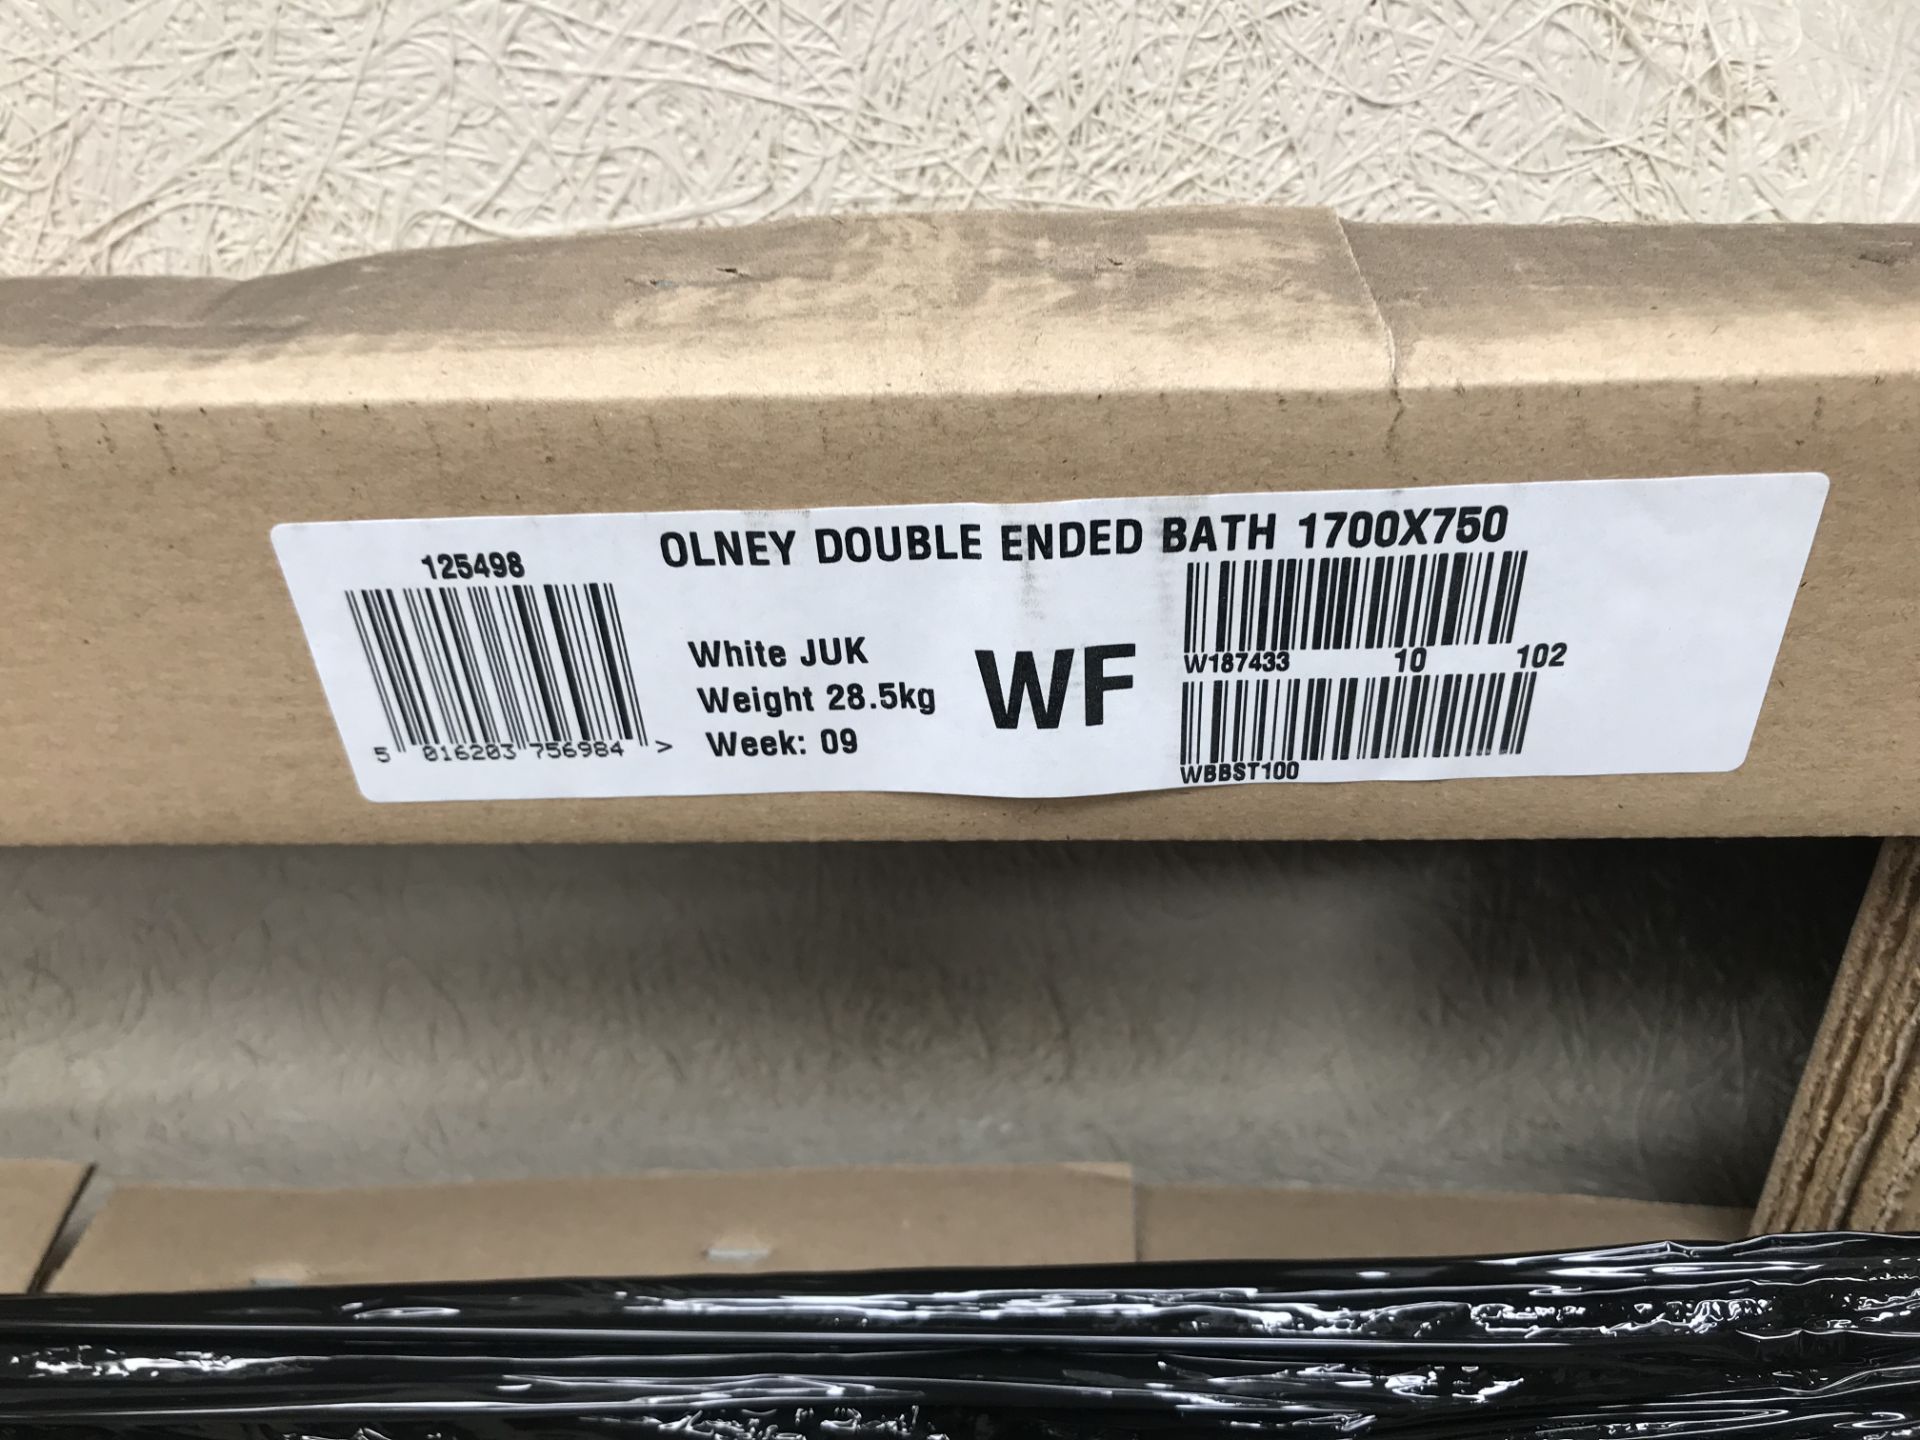 Pallet of 5 x Olney Symmetrical Double Ended Bath - Image 3 of 9